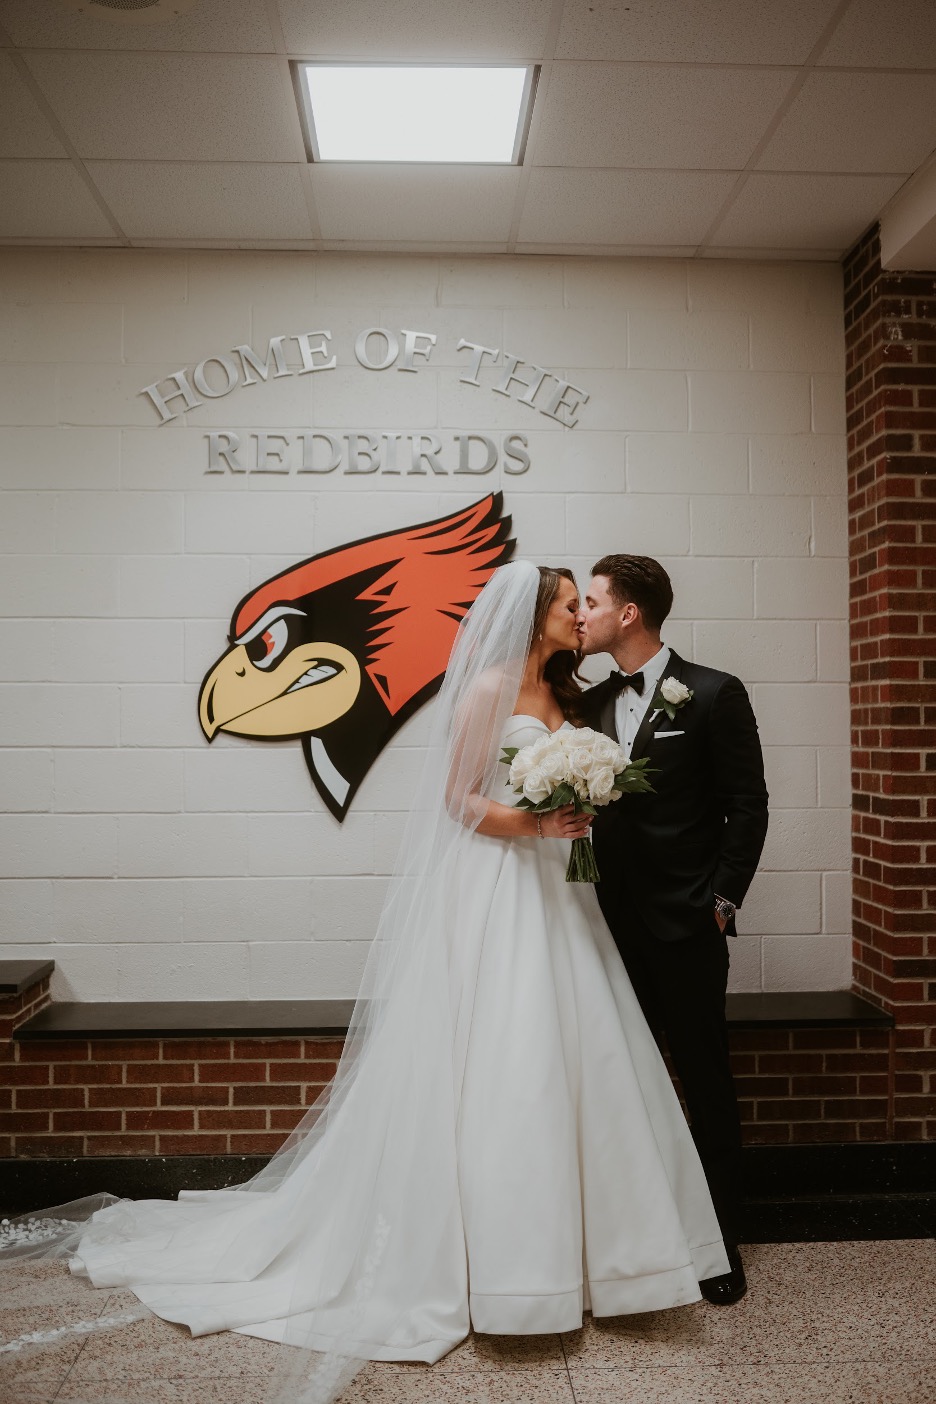 The bride and groom make a pitstop at their high school, where they met, on their wedding day.